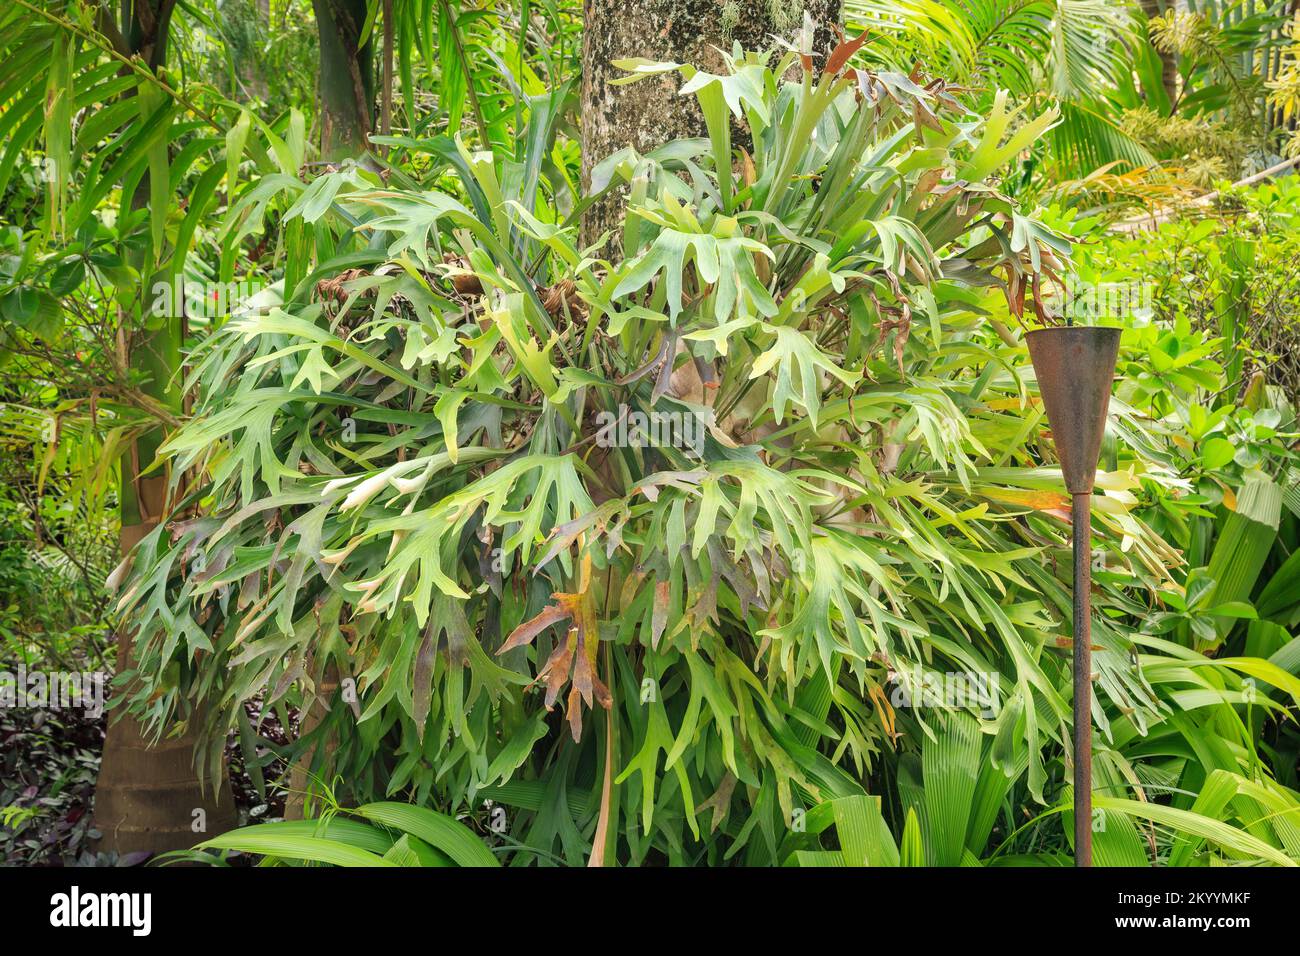 A giant staghorn fern (Platycerium sp.) growing on a tree in a botanical garden Stock Photo